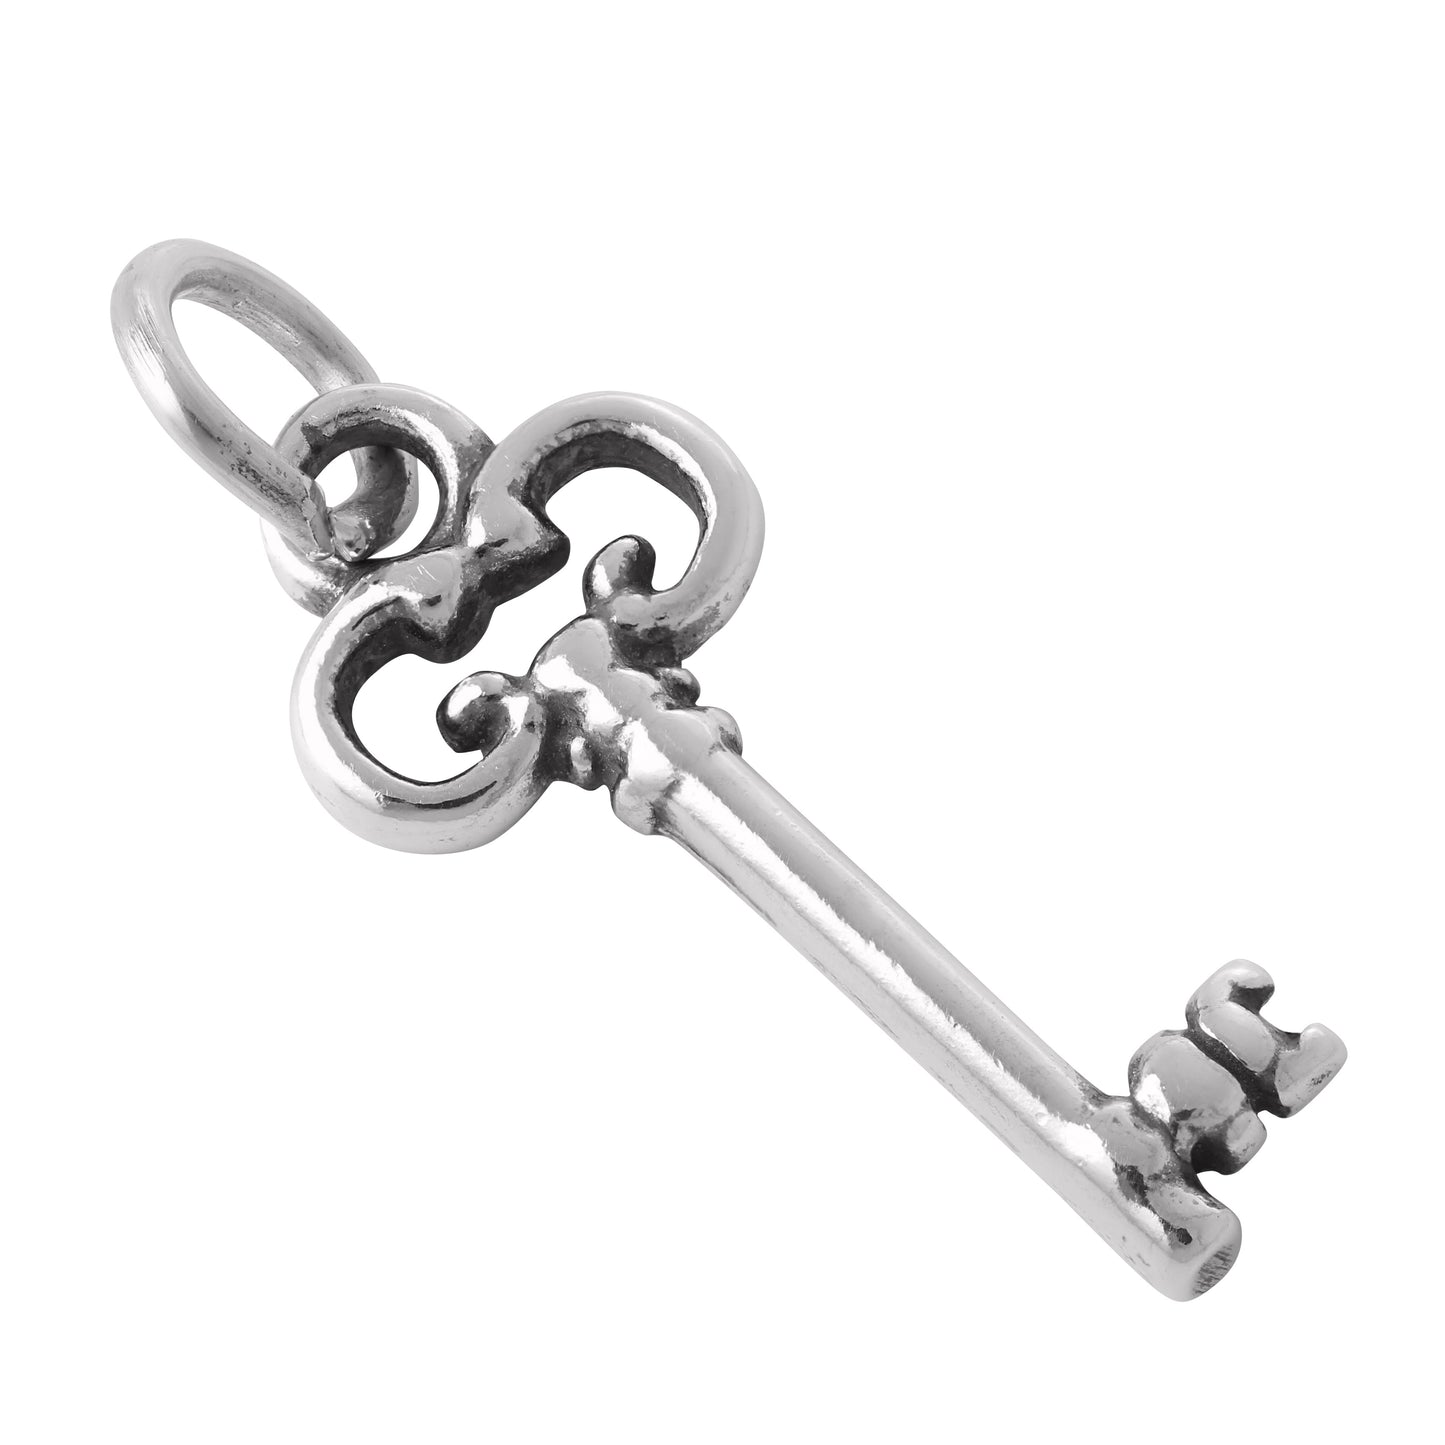 Sterling Silver Old Fashioned Key Charm